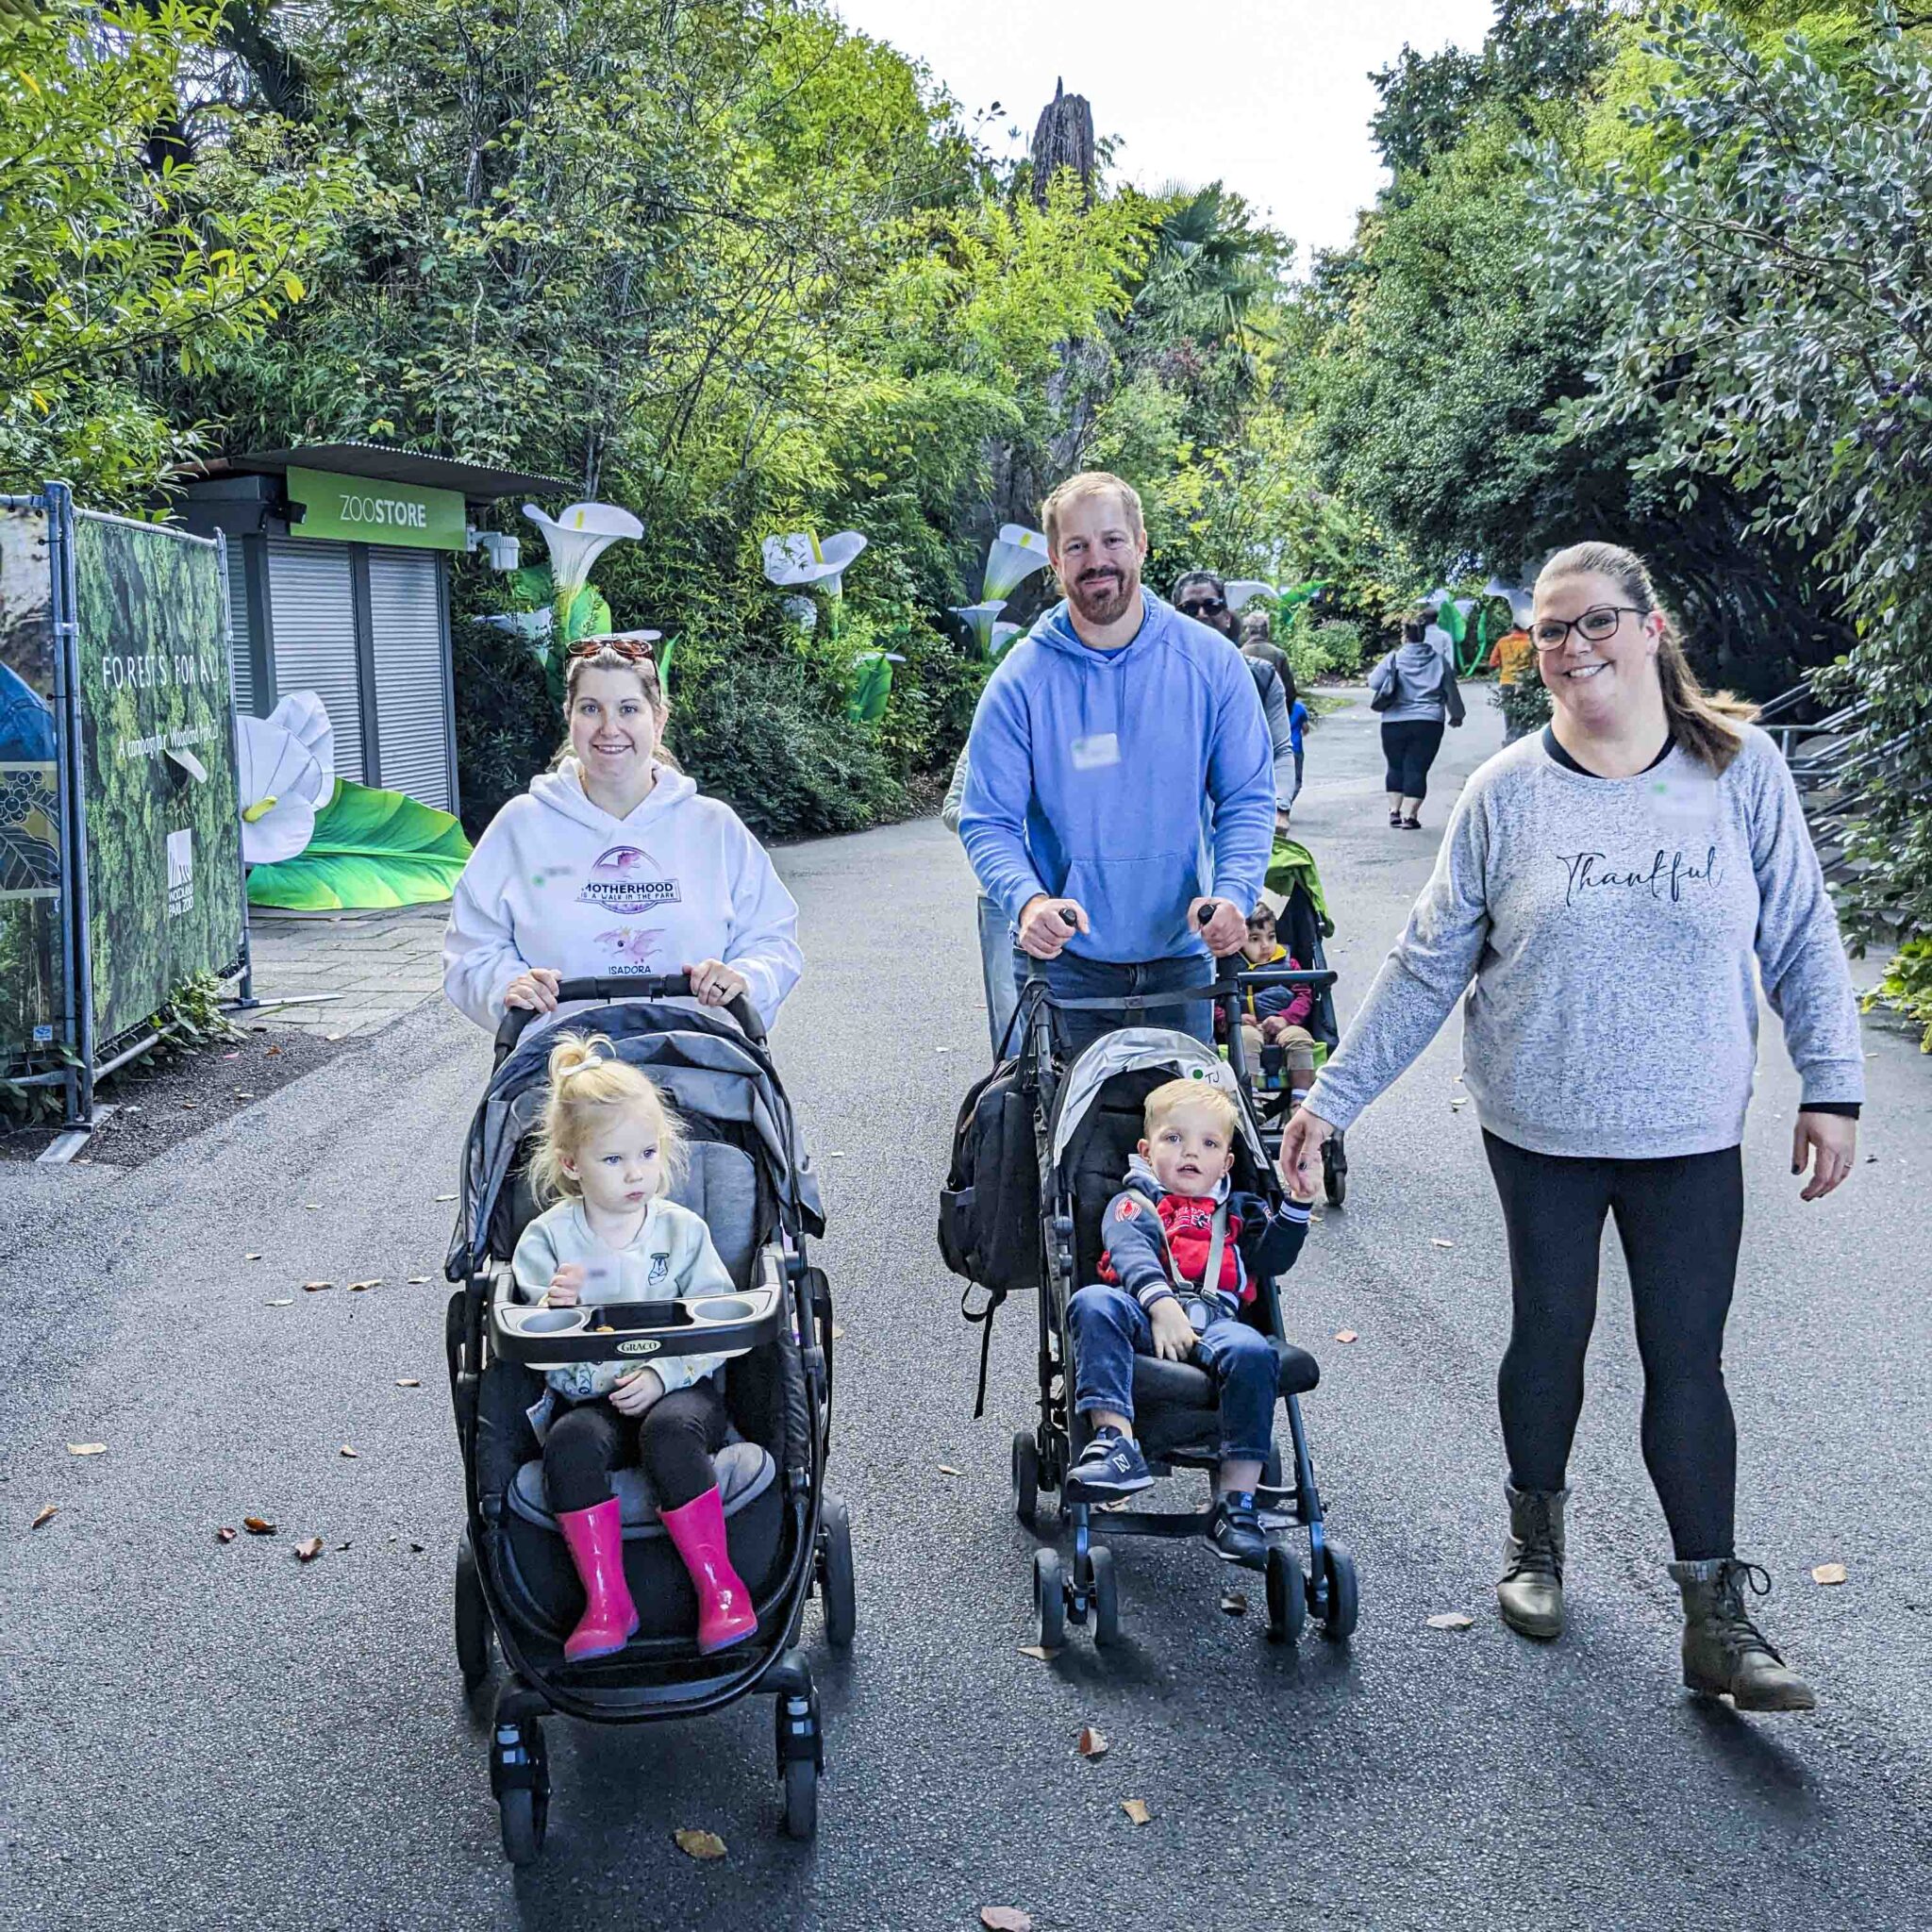 Two families walk down a pathway with strollers at the zoo